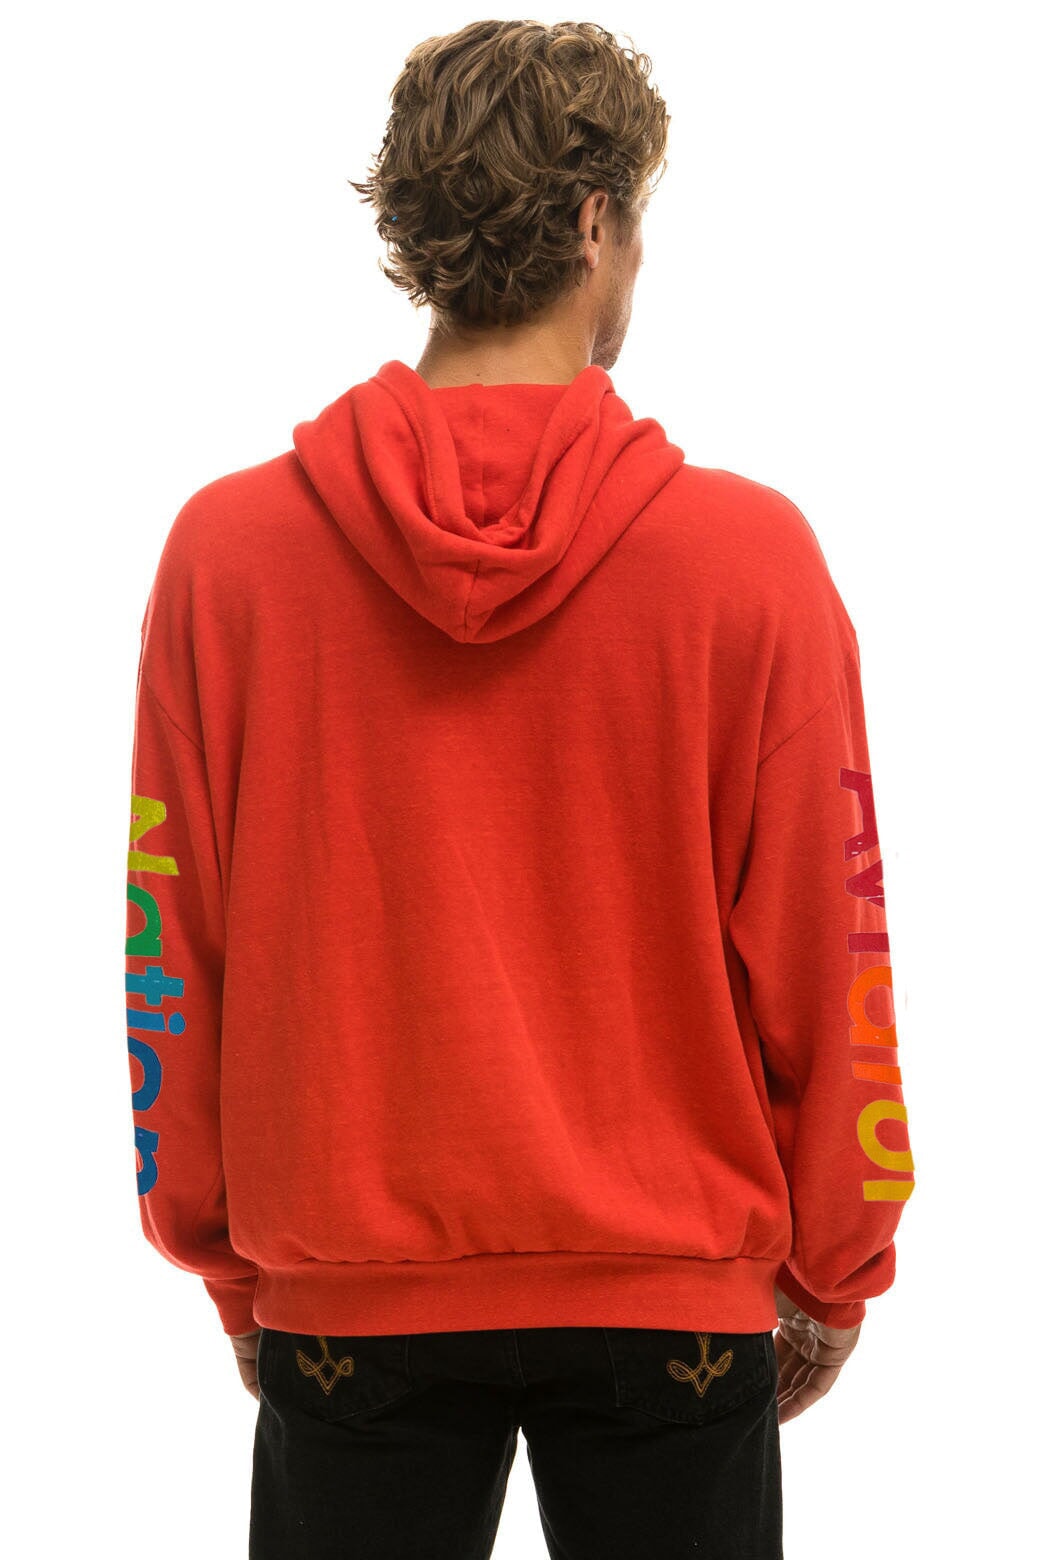 AVIATOR NATION HAIGHT ASHBURY RELAXED PULLOVER HOODIE - RED Hoodie Aviator Nation 